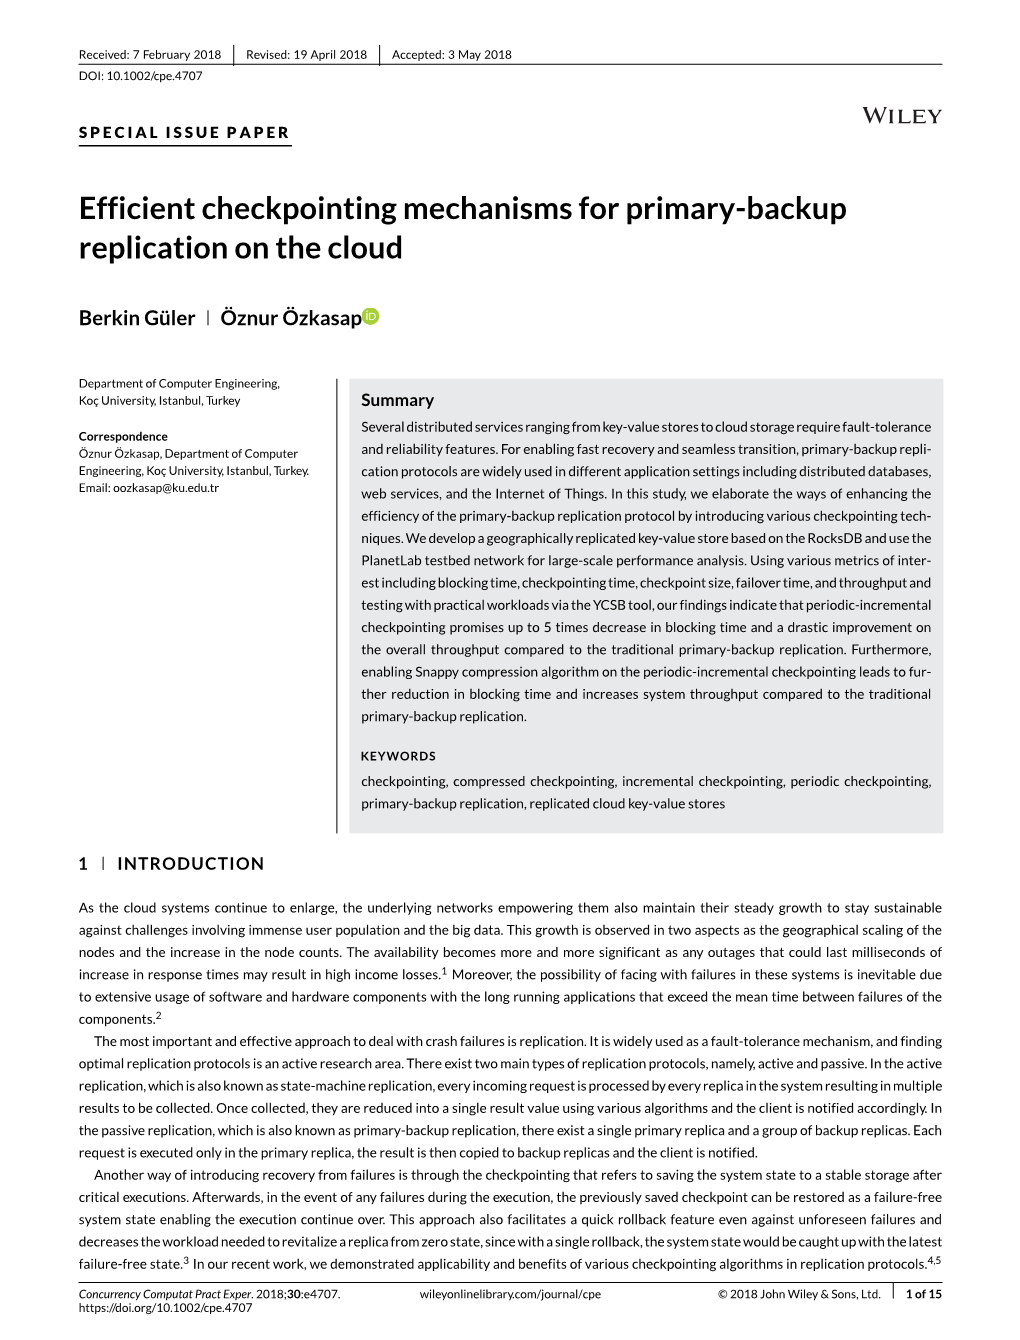 Efficient Checkpointing Mechanisms for Primary-Backup Replication on the Cloud